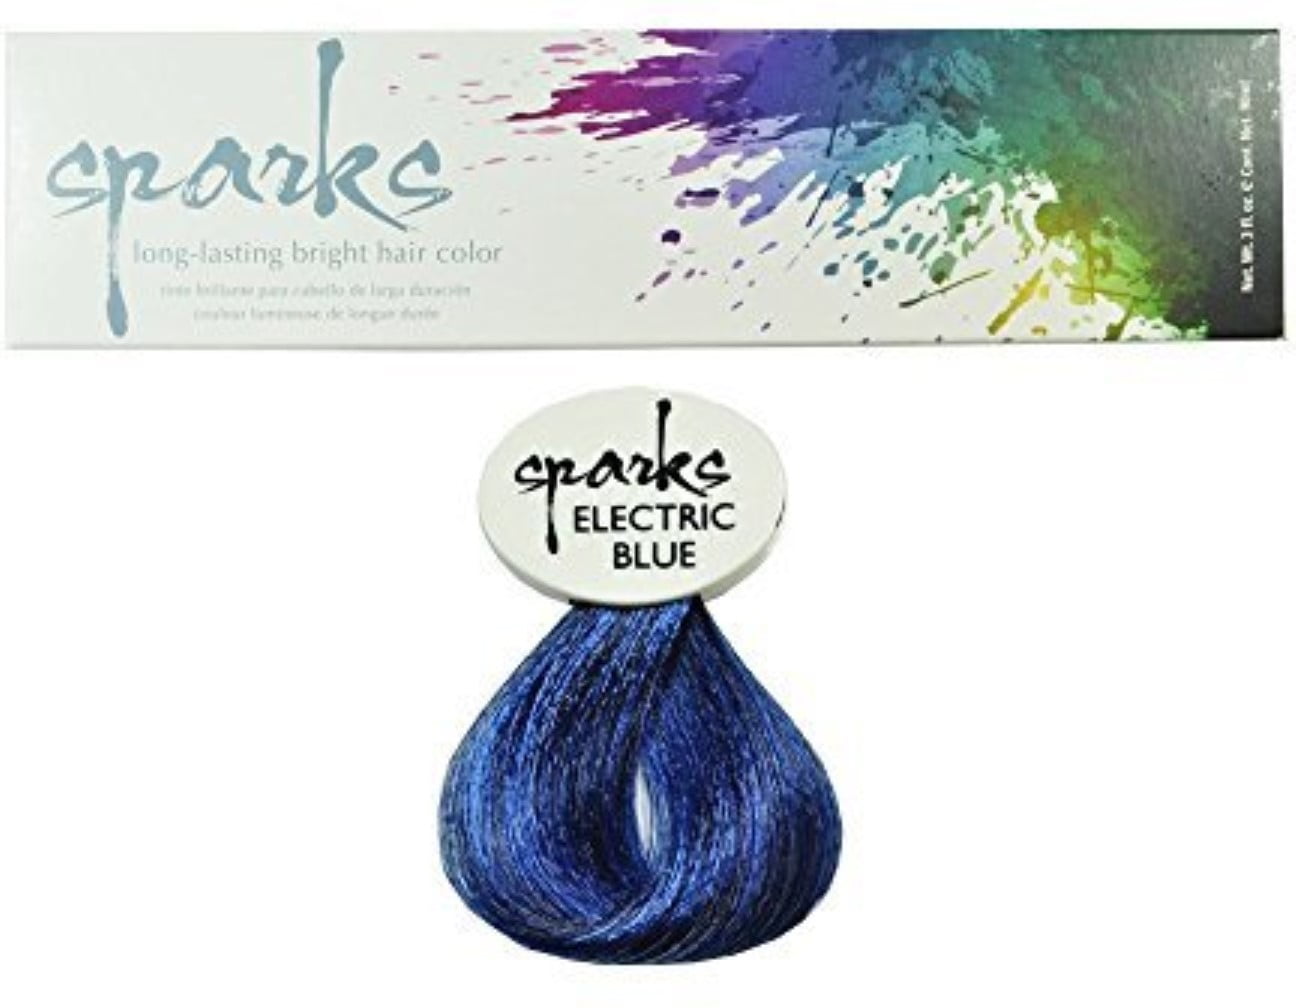 7. Sparks Long Lasting Bright Hair Color - Electric Blue - wide 1